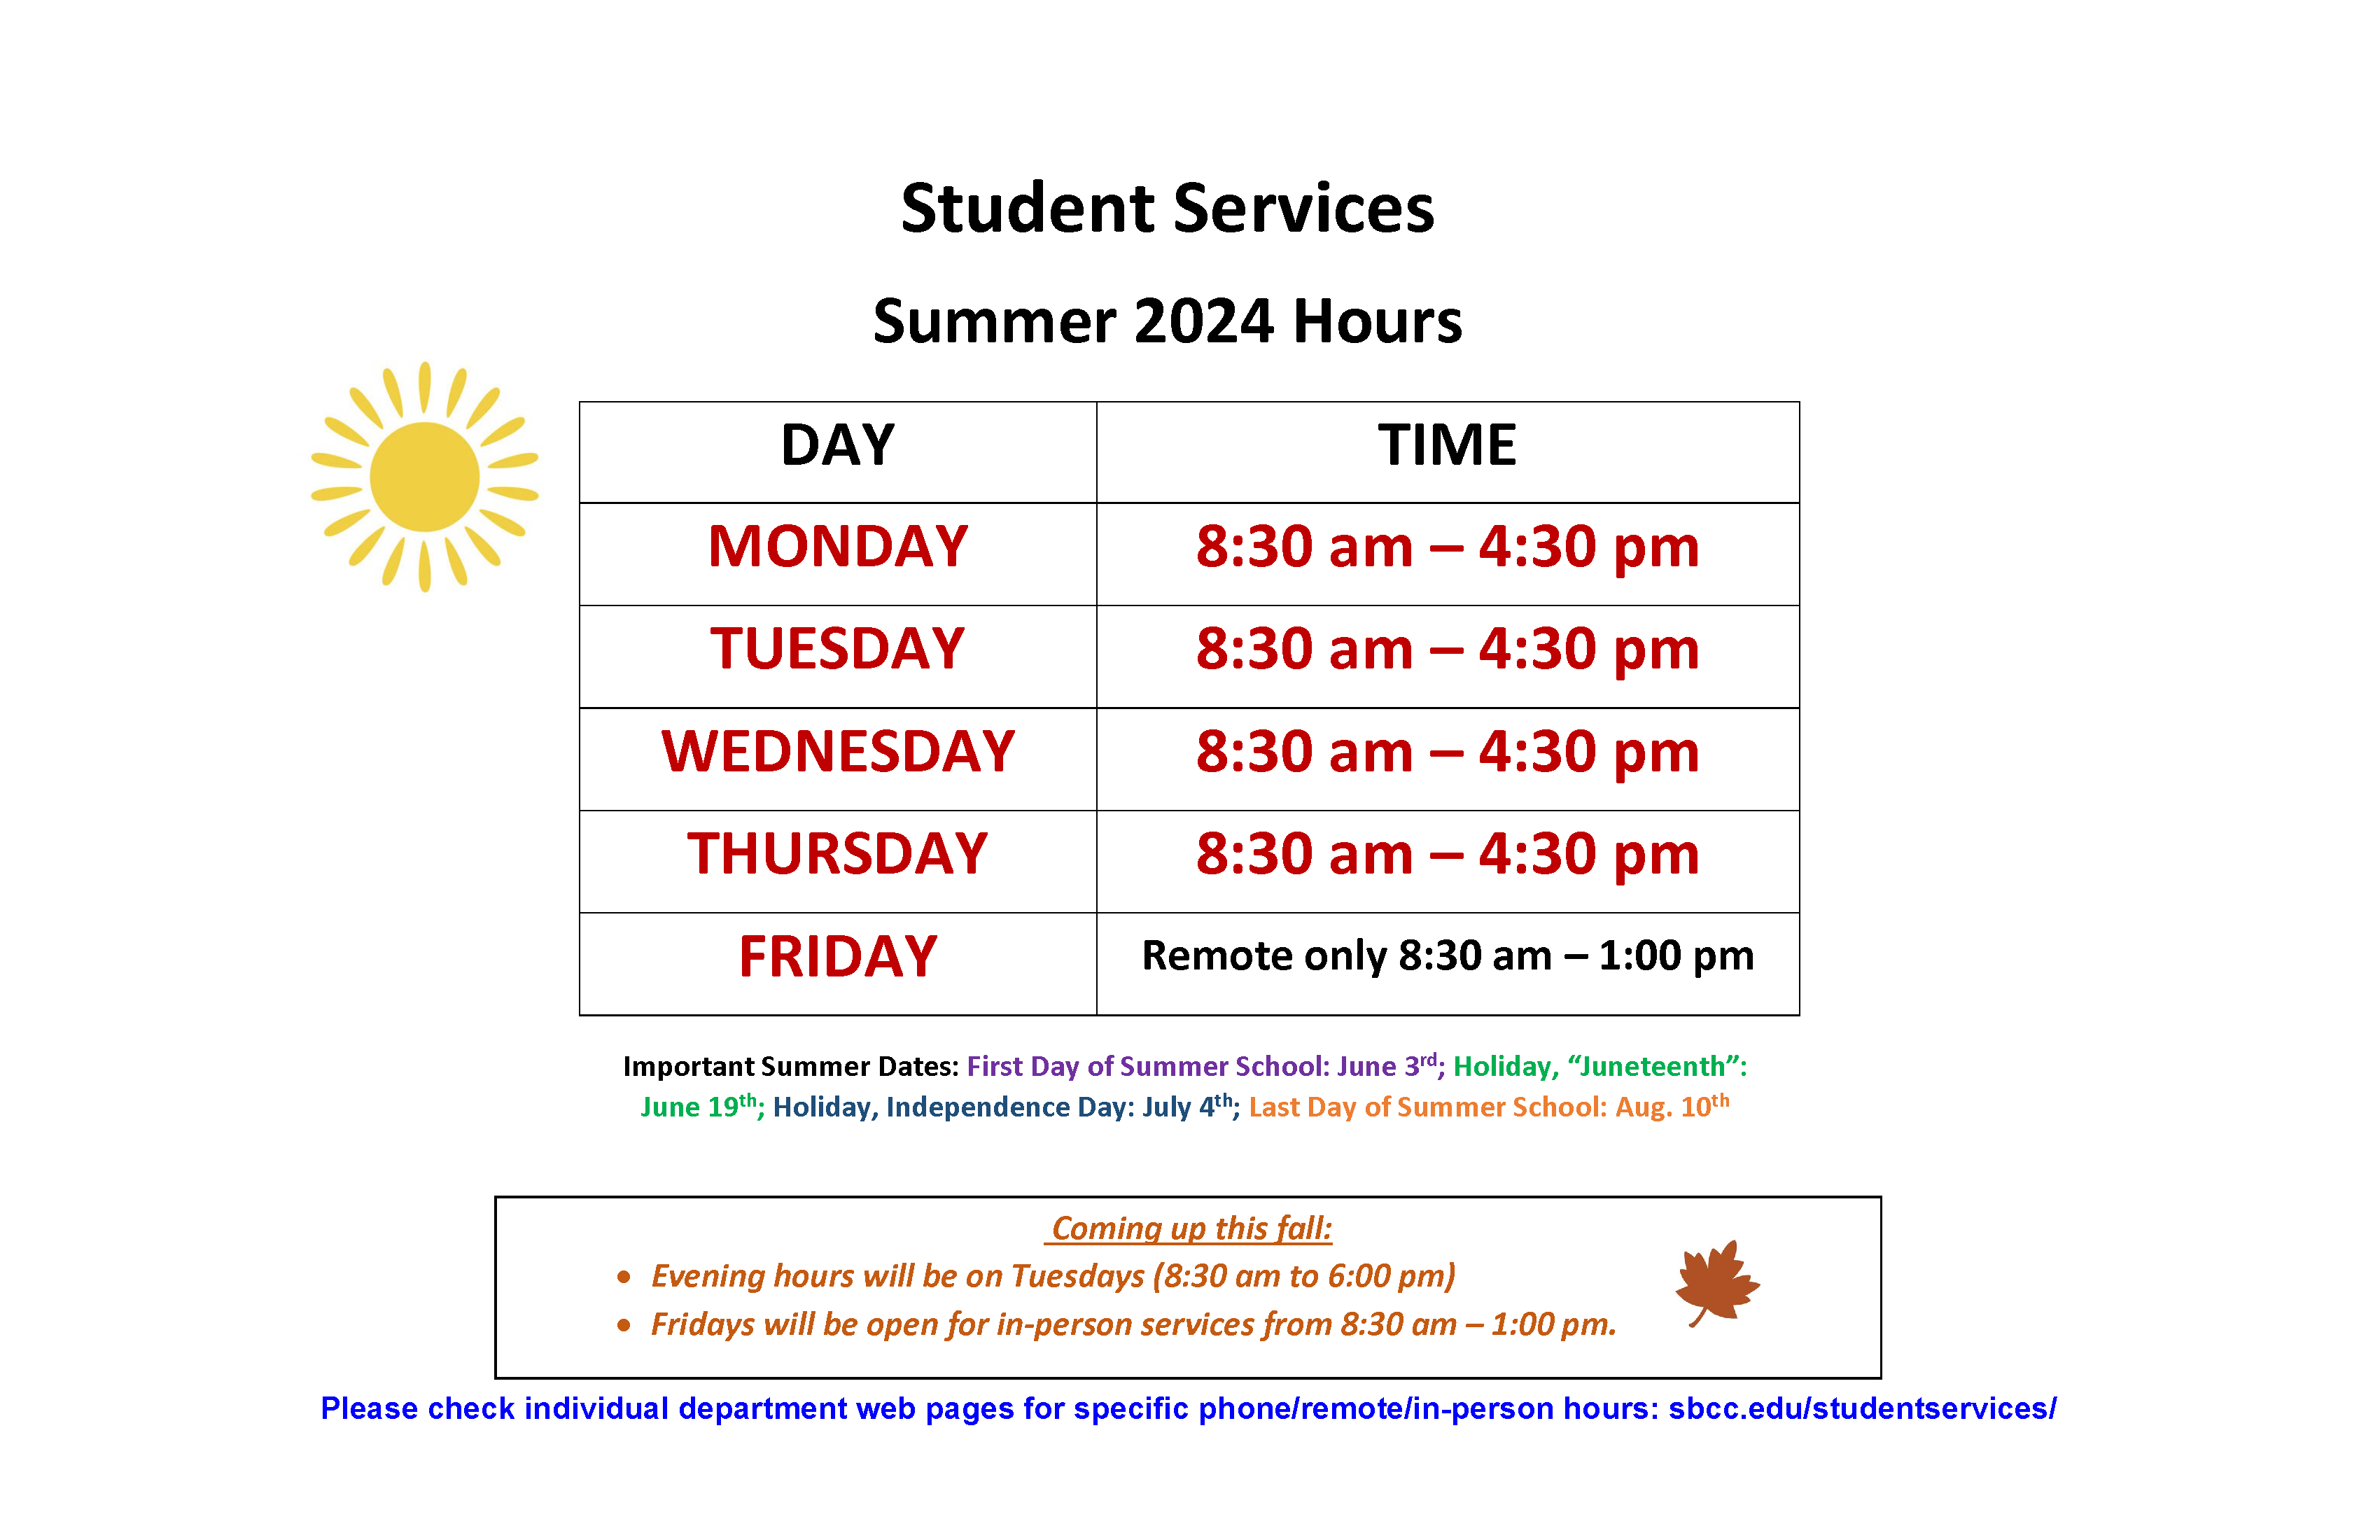 Summer 2024 student services hours - click for PDF